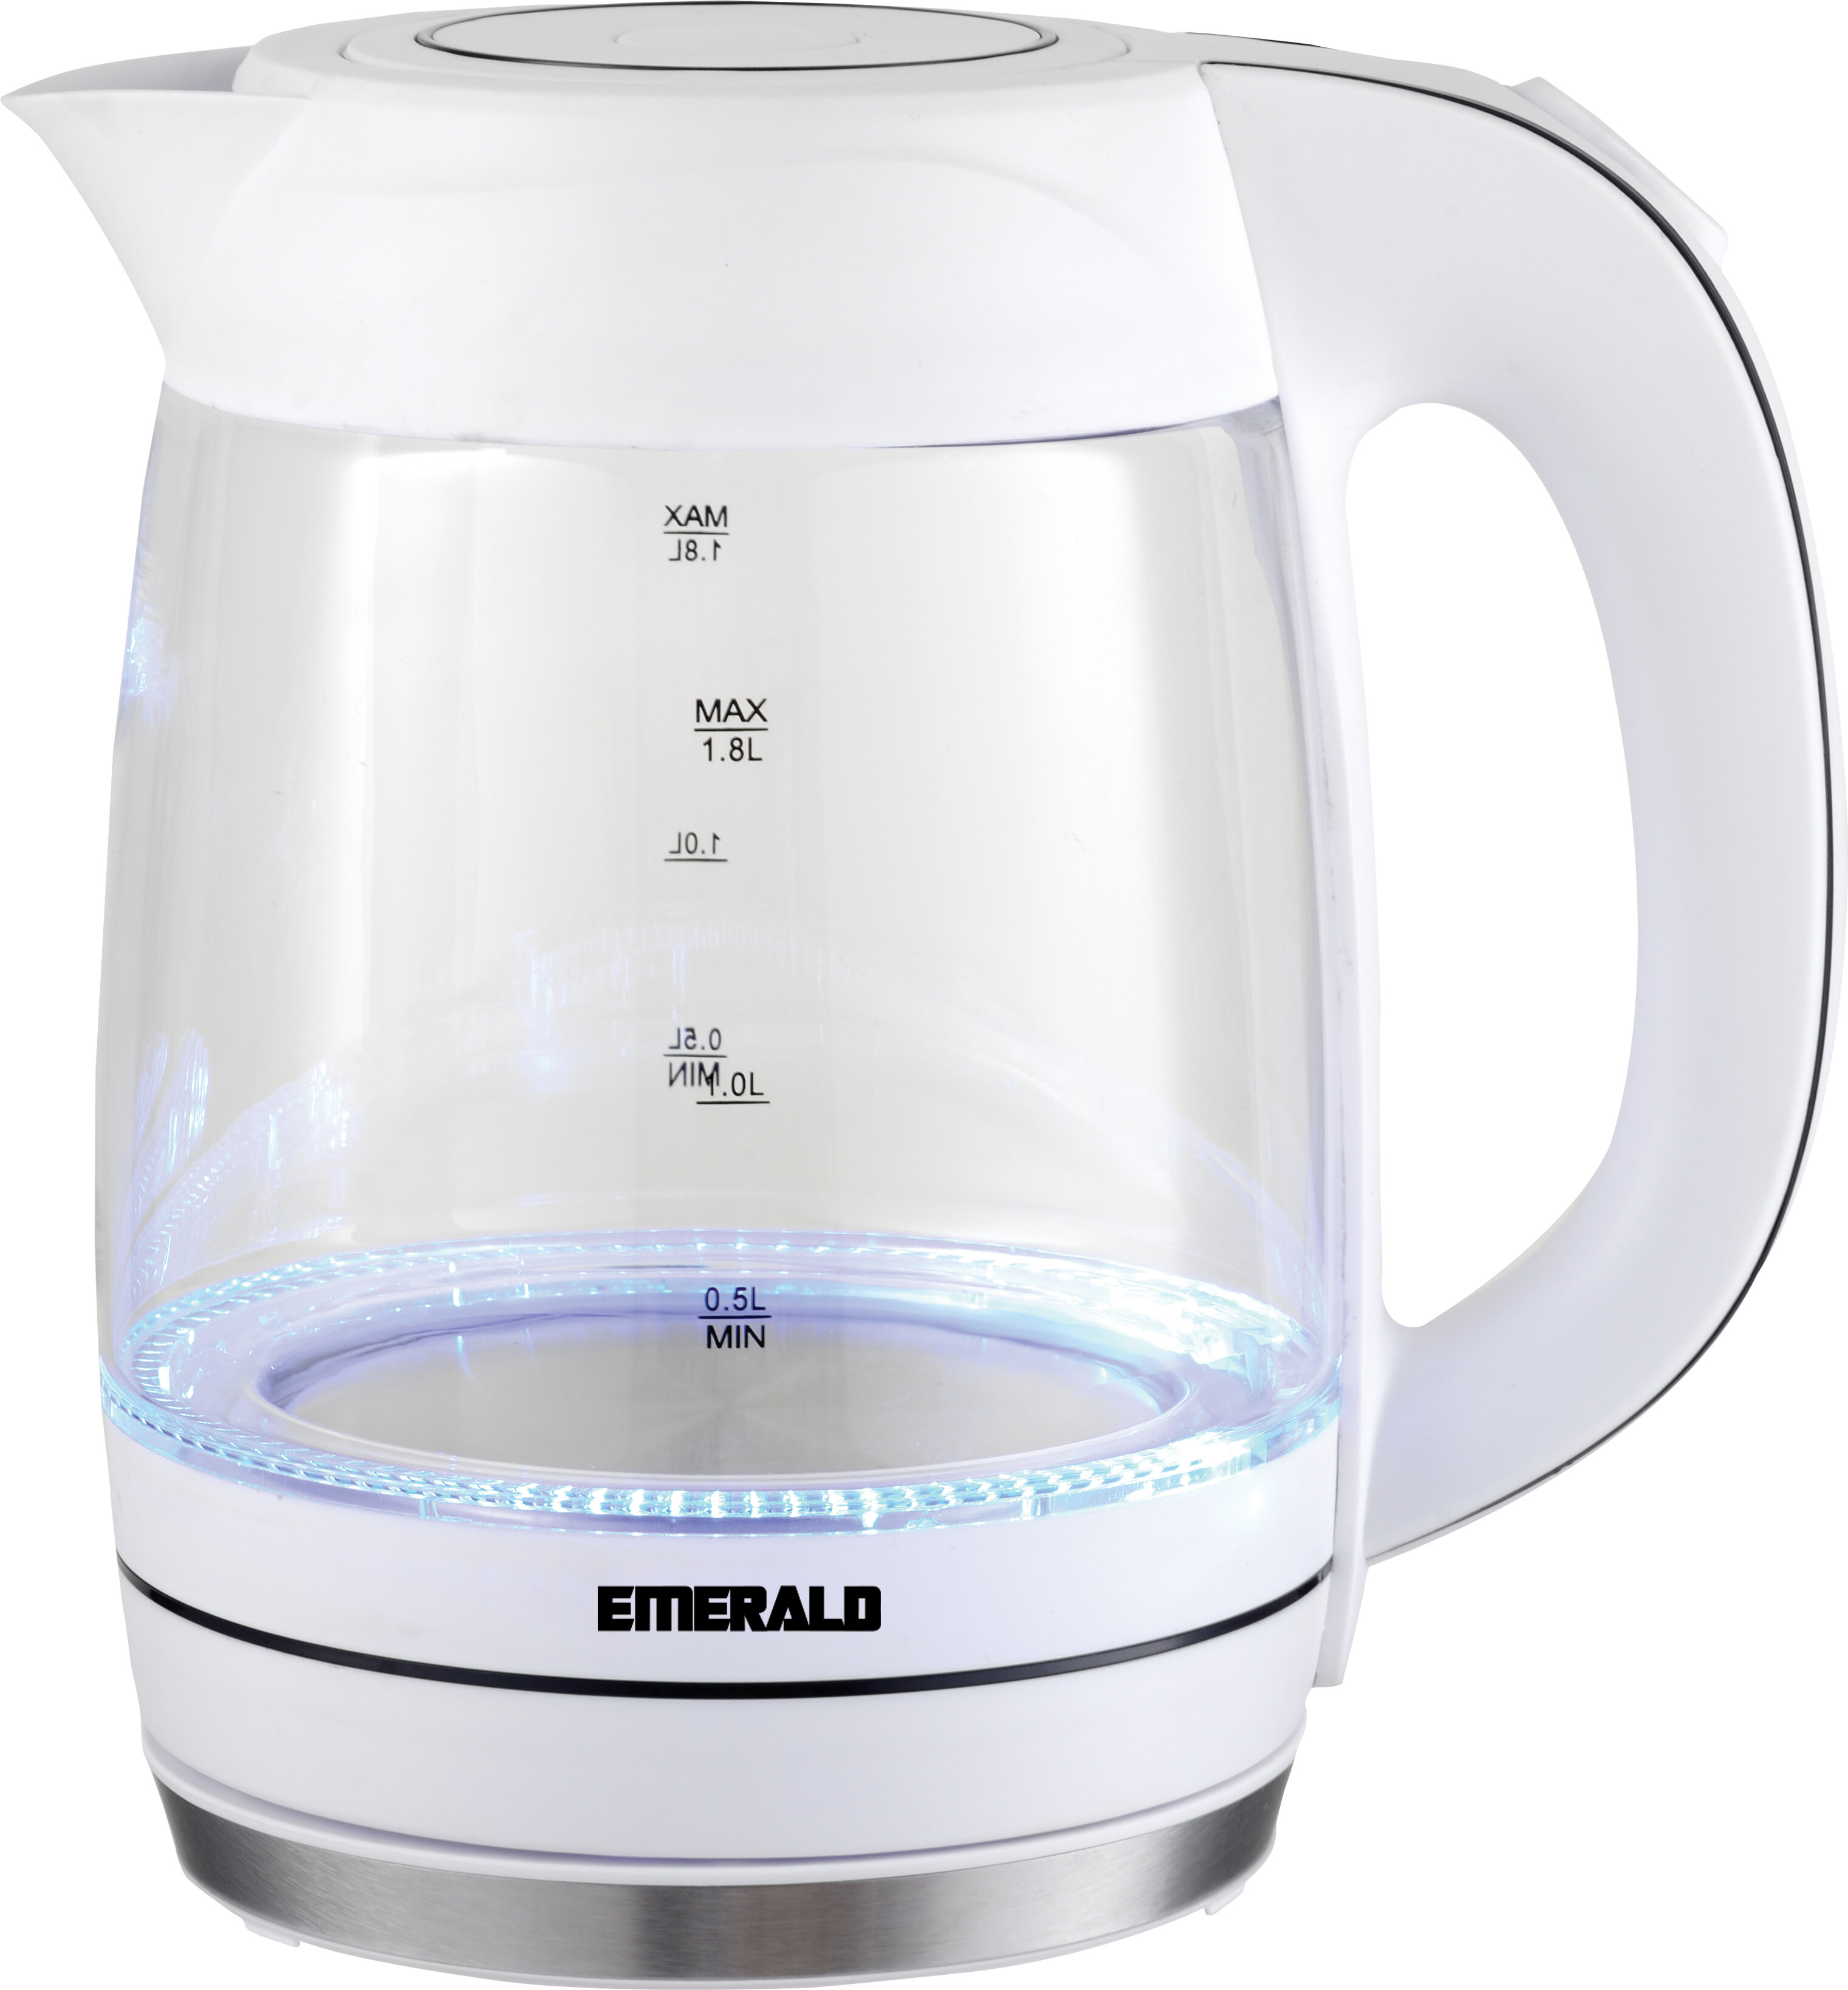 small glass electric tea kettle